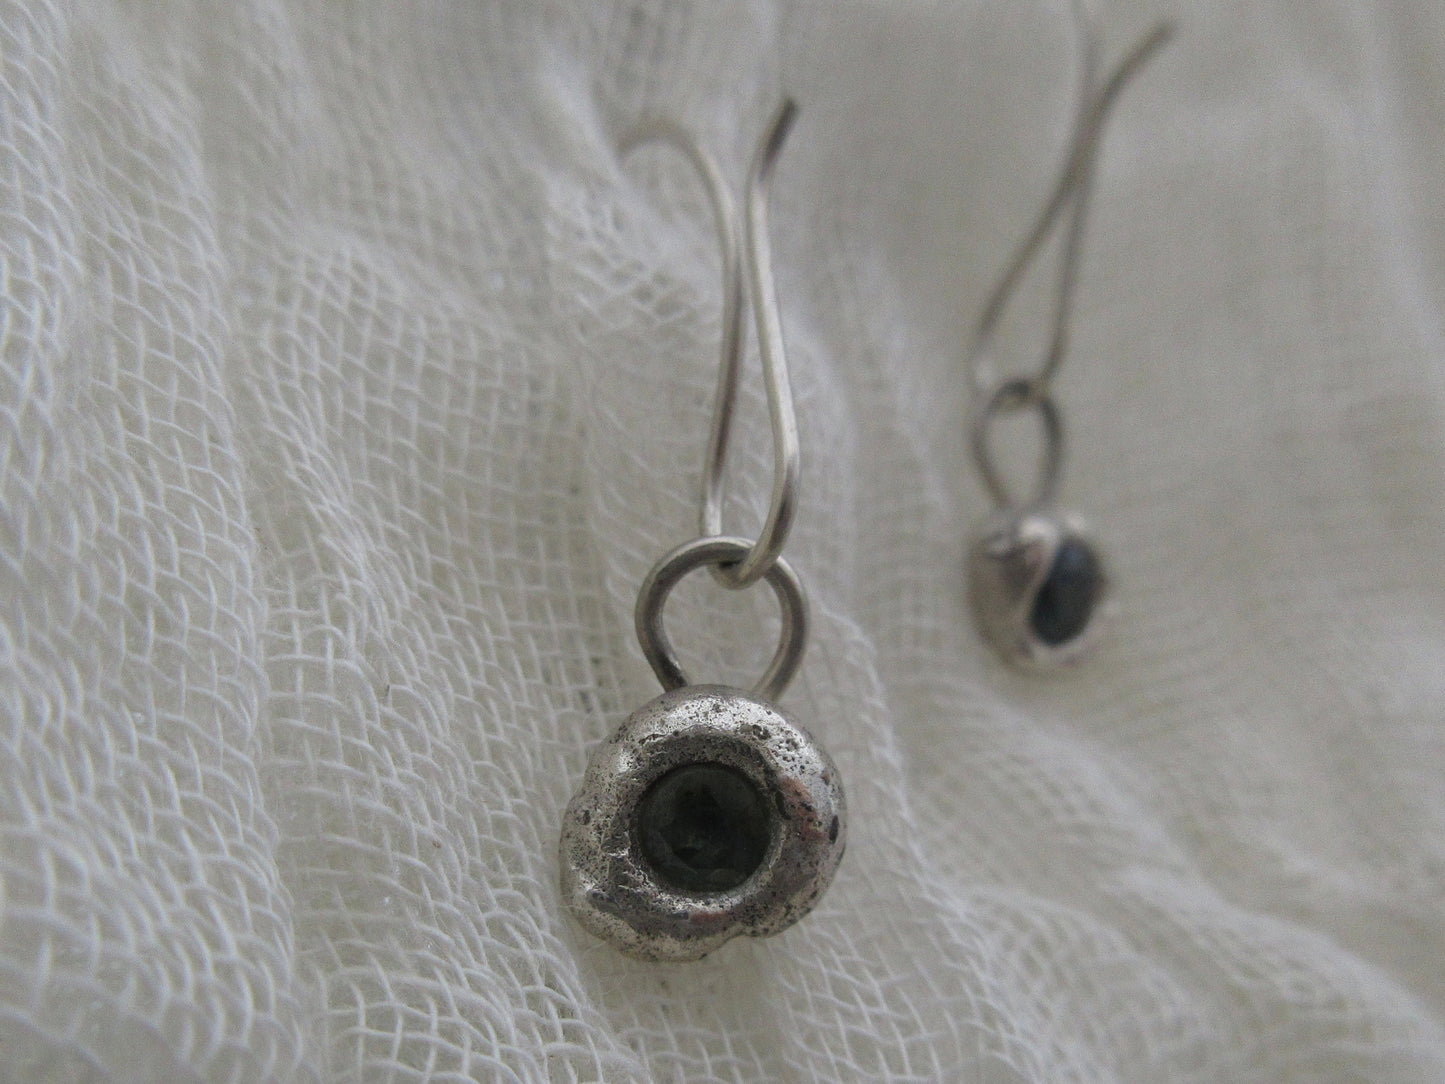 Cast in place sapphire earrings in argentium sterling silver